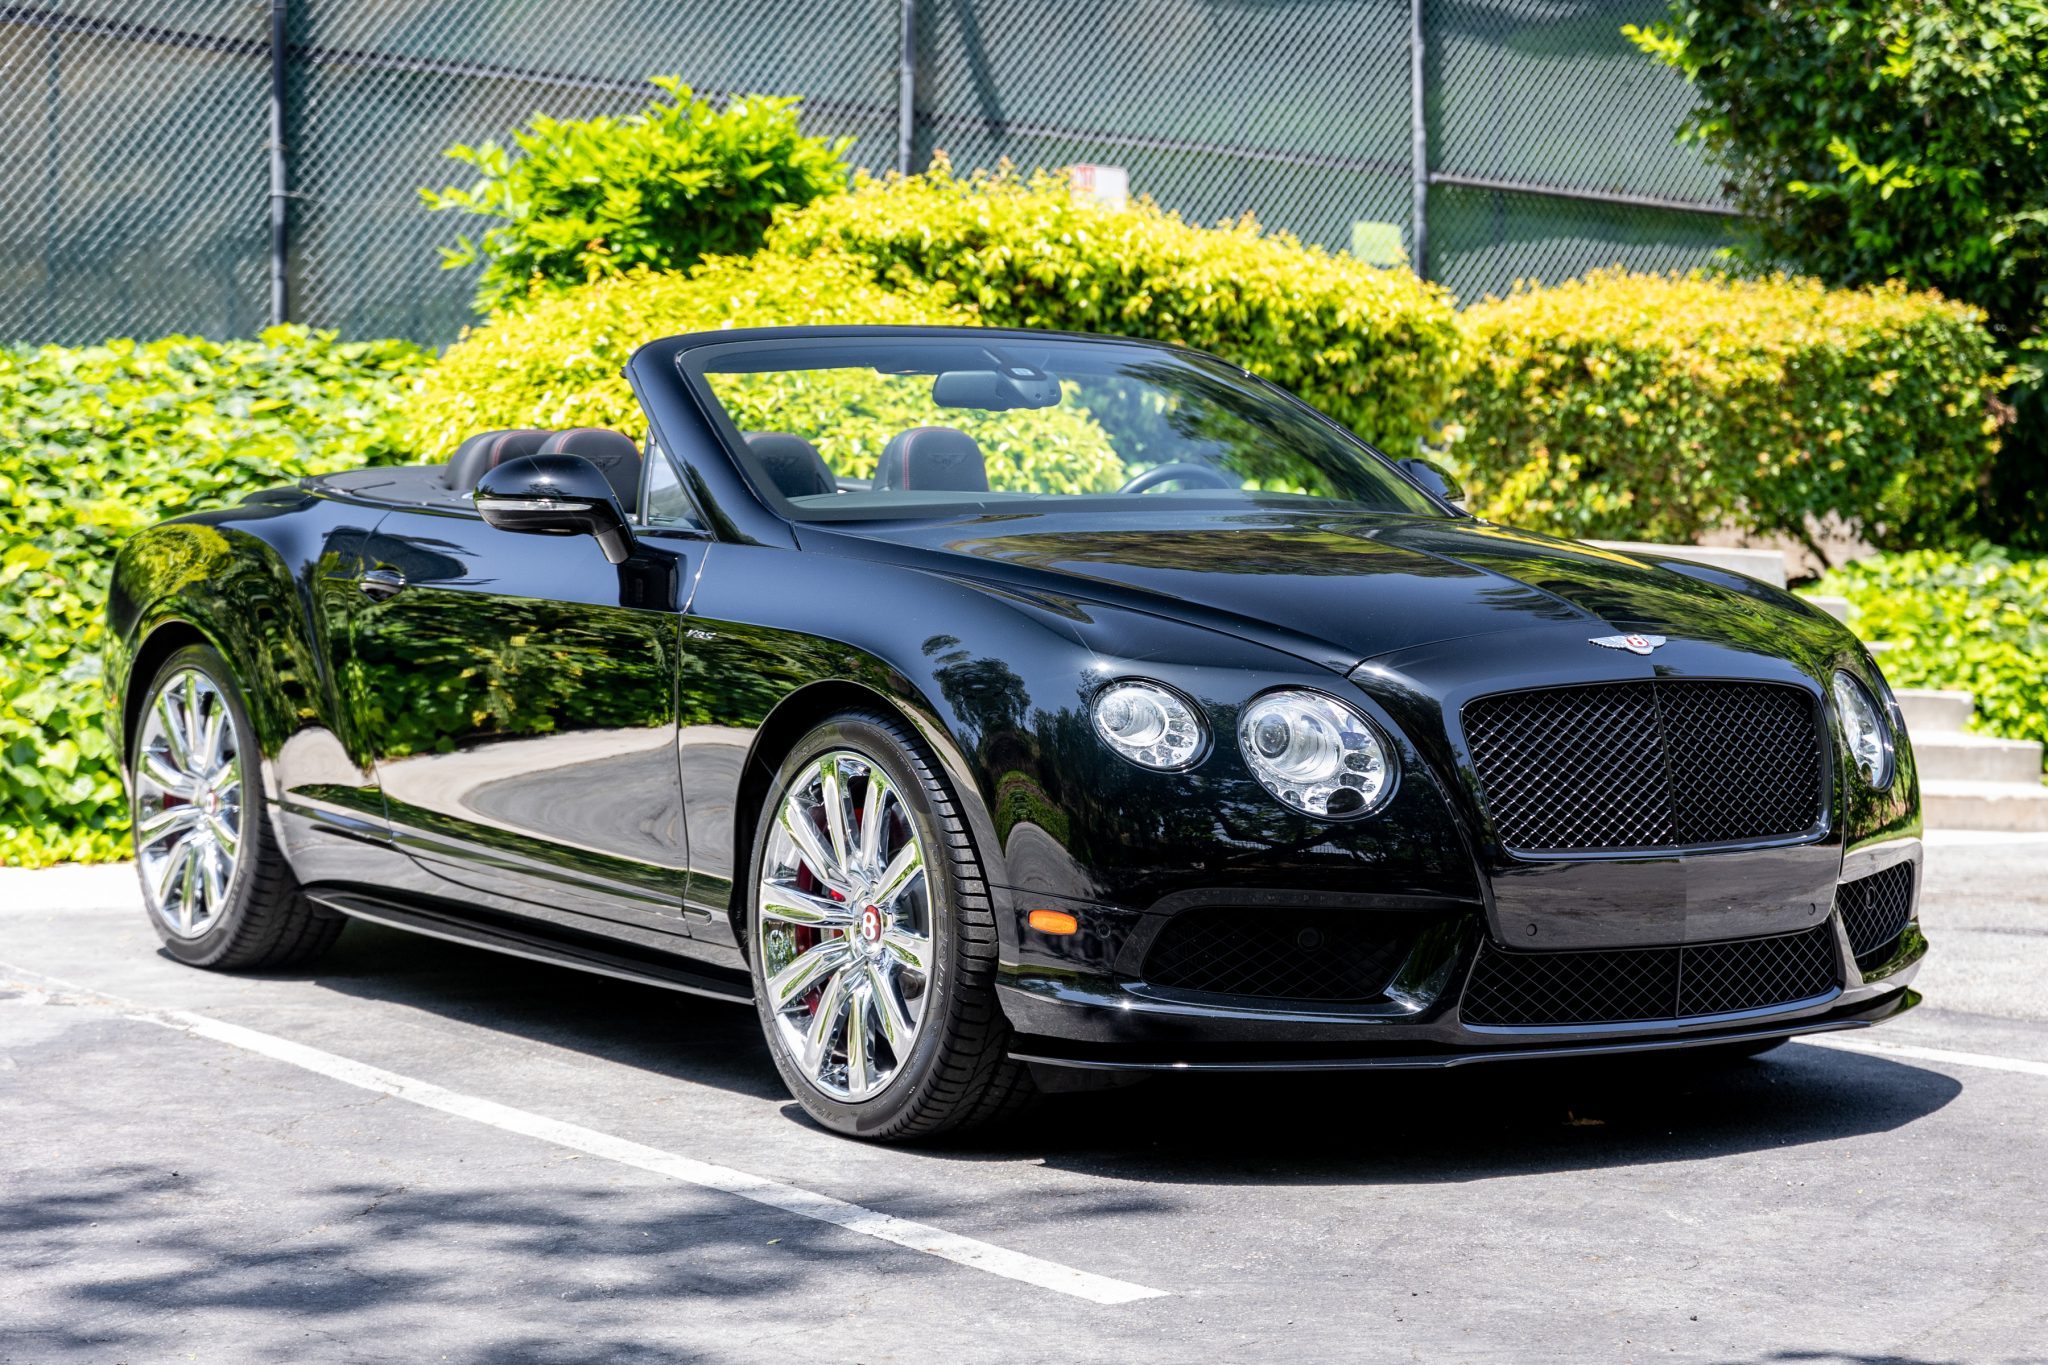 Used 23k-Mile 2014 Bentley Continental GTC V8 S Review